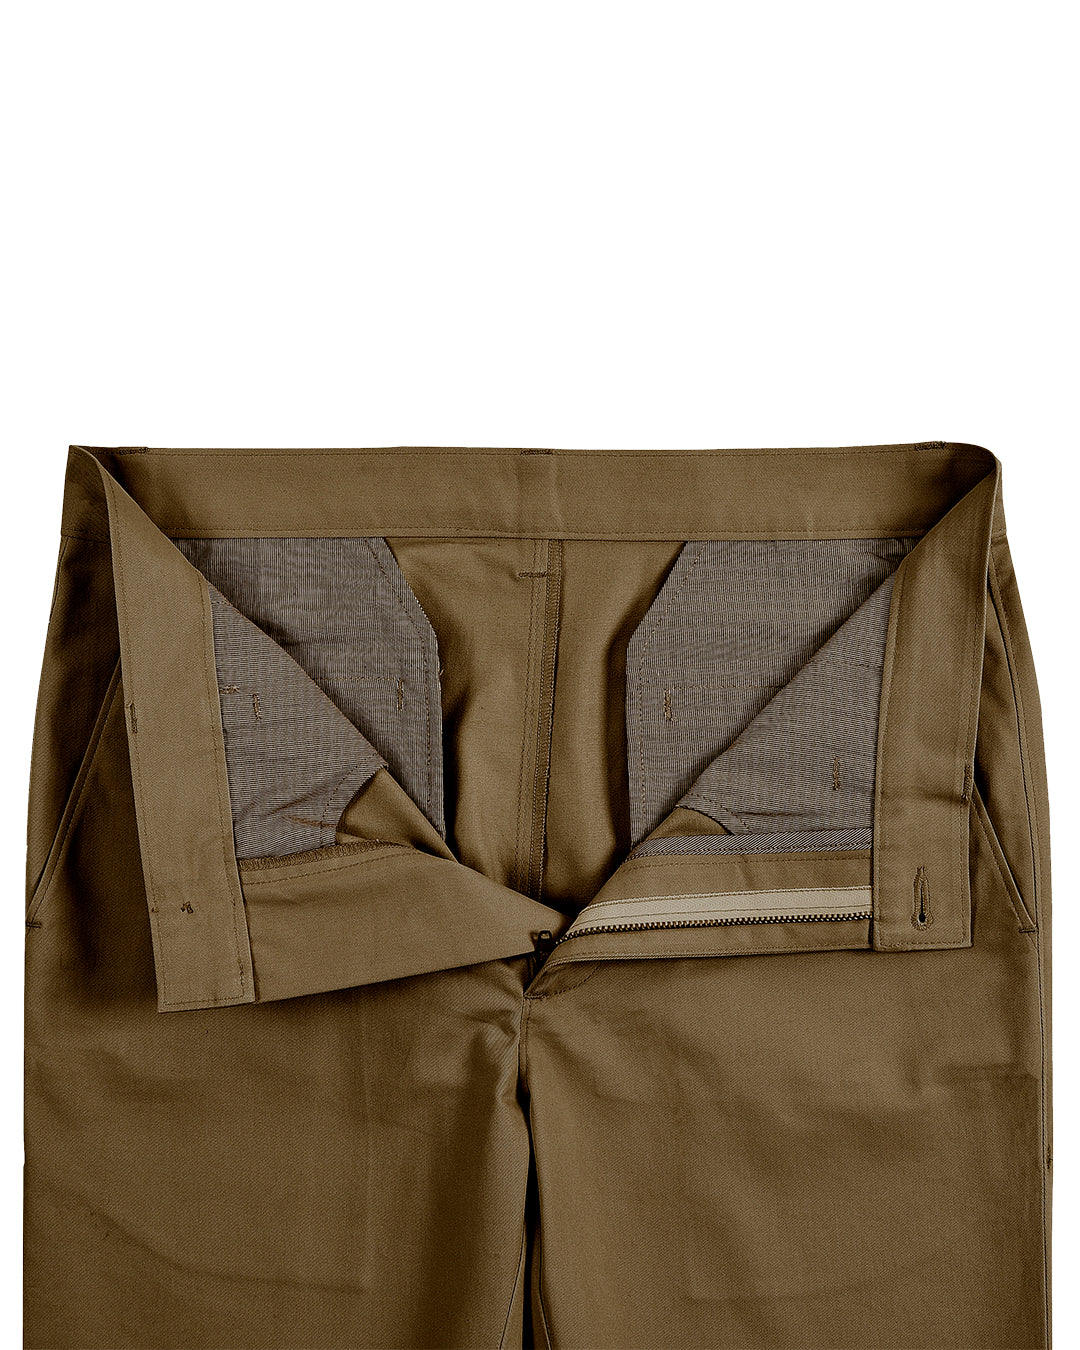 Open front view of custom Genoa Chino pants for men by Luxire in copper